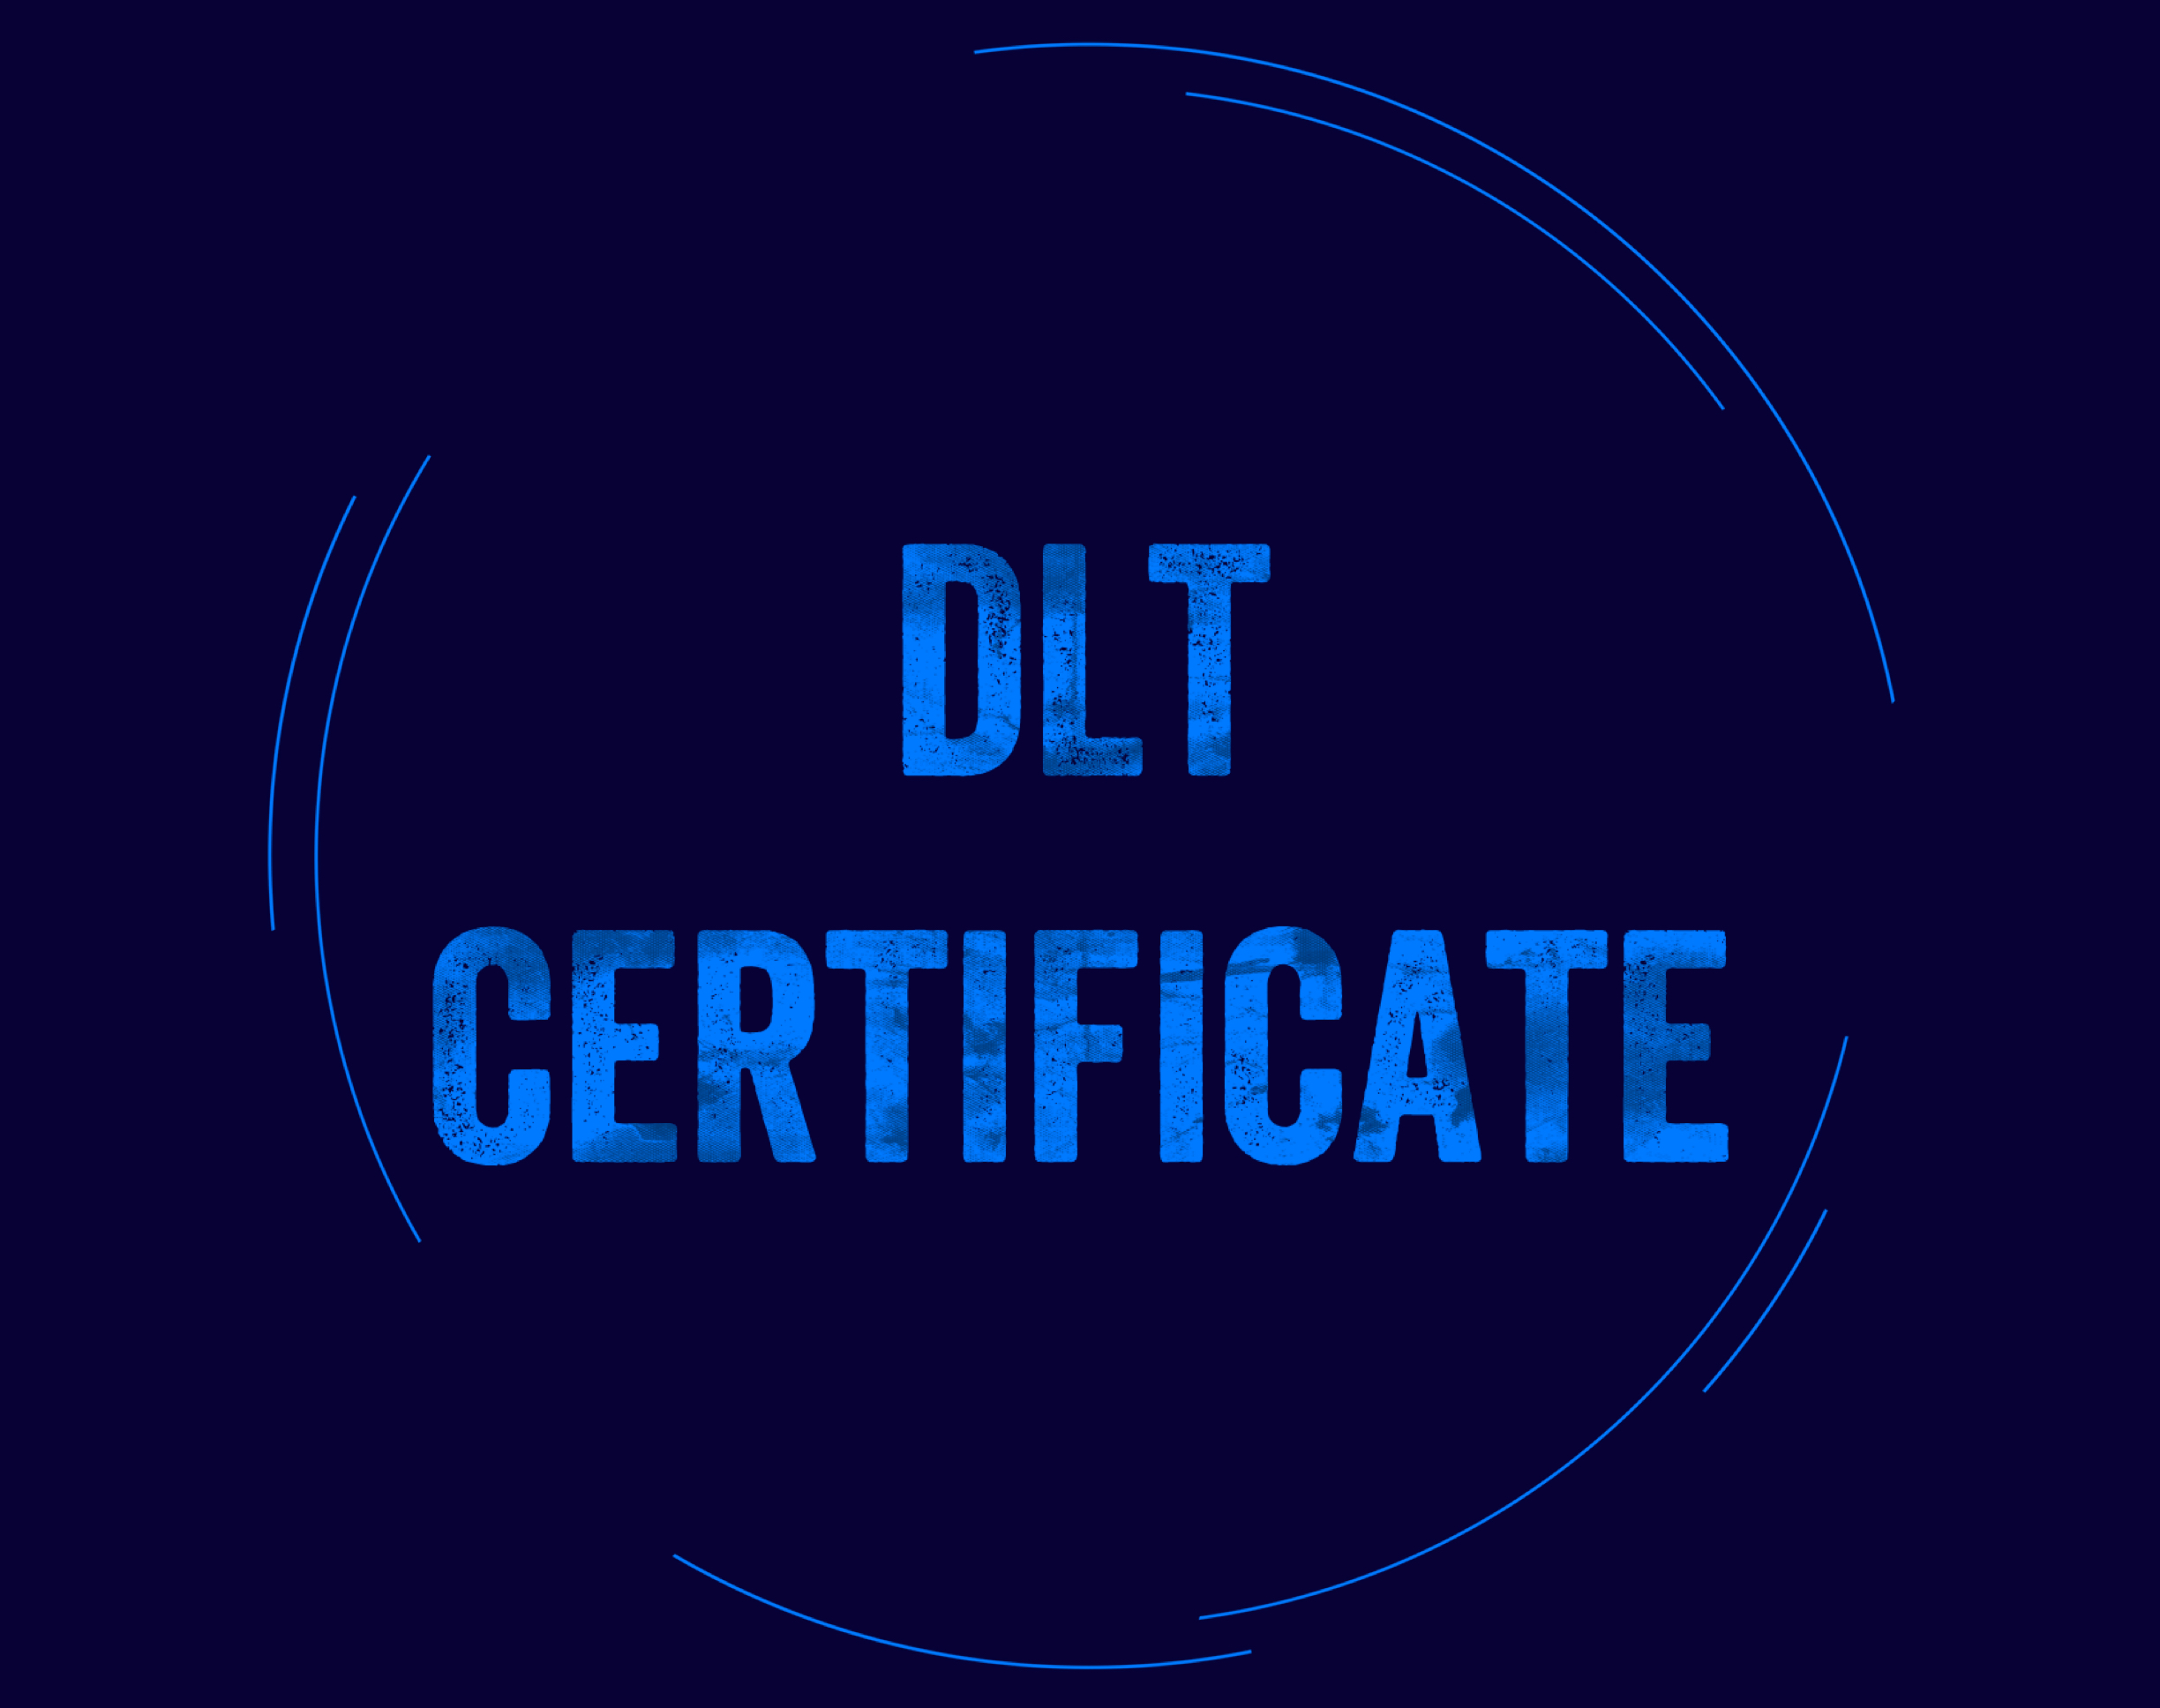 The Distributed Ledger Technology in Finance Certificate (DLT) organized by WBS Training